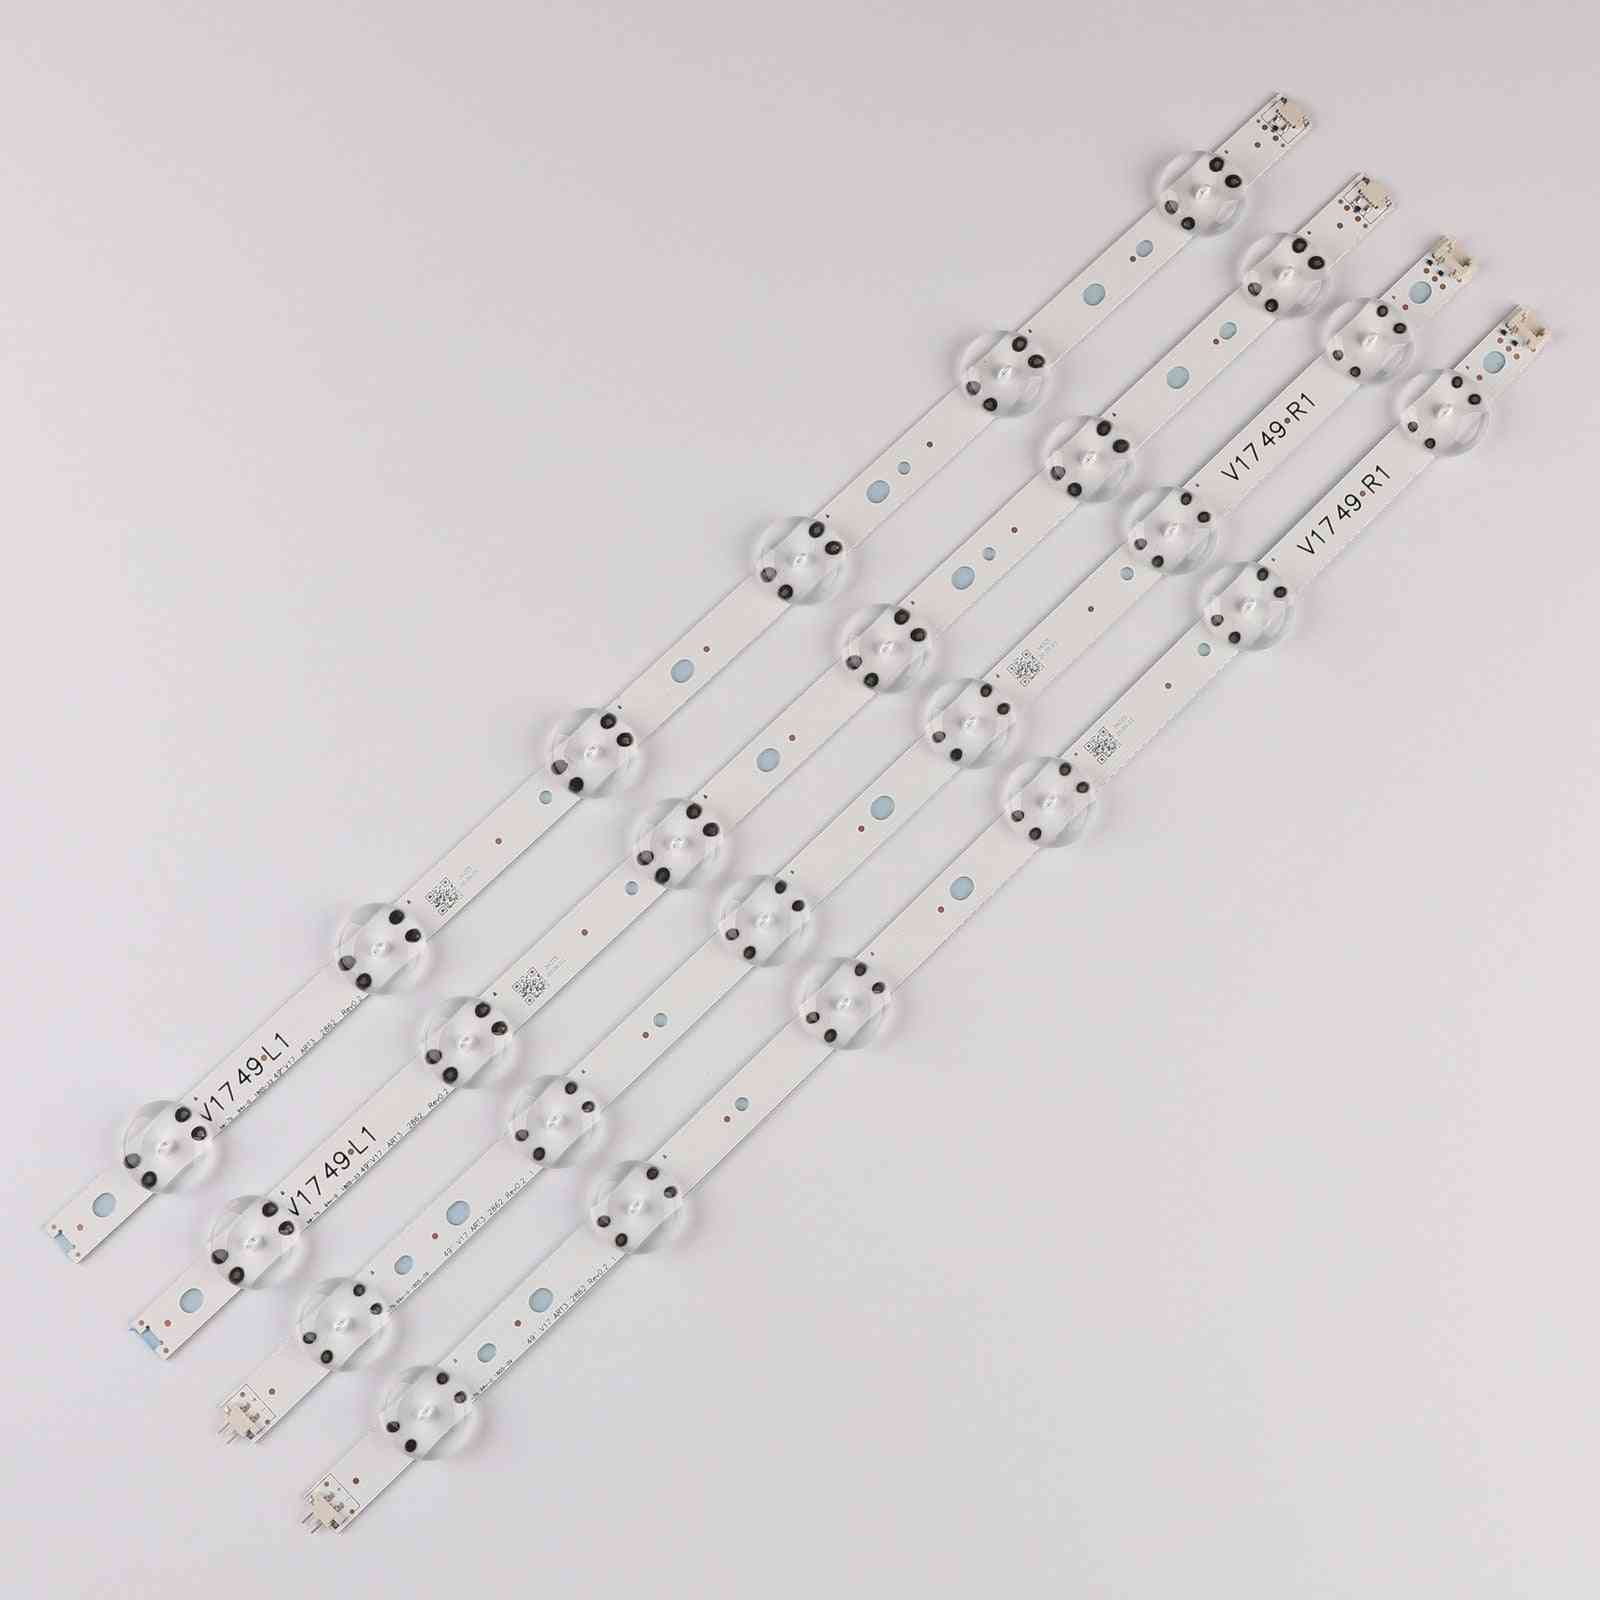 12-led Strips For Tv Computer Accessories